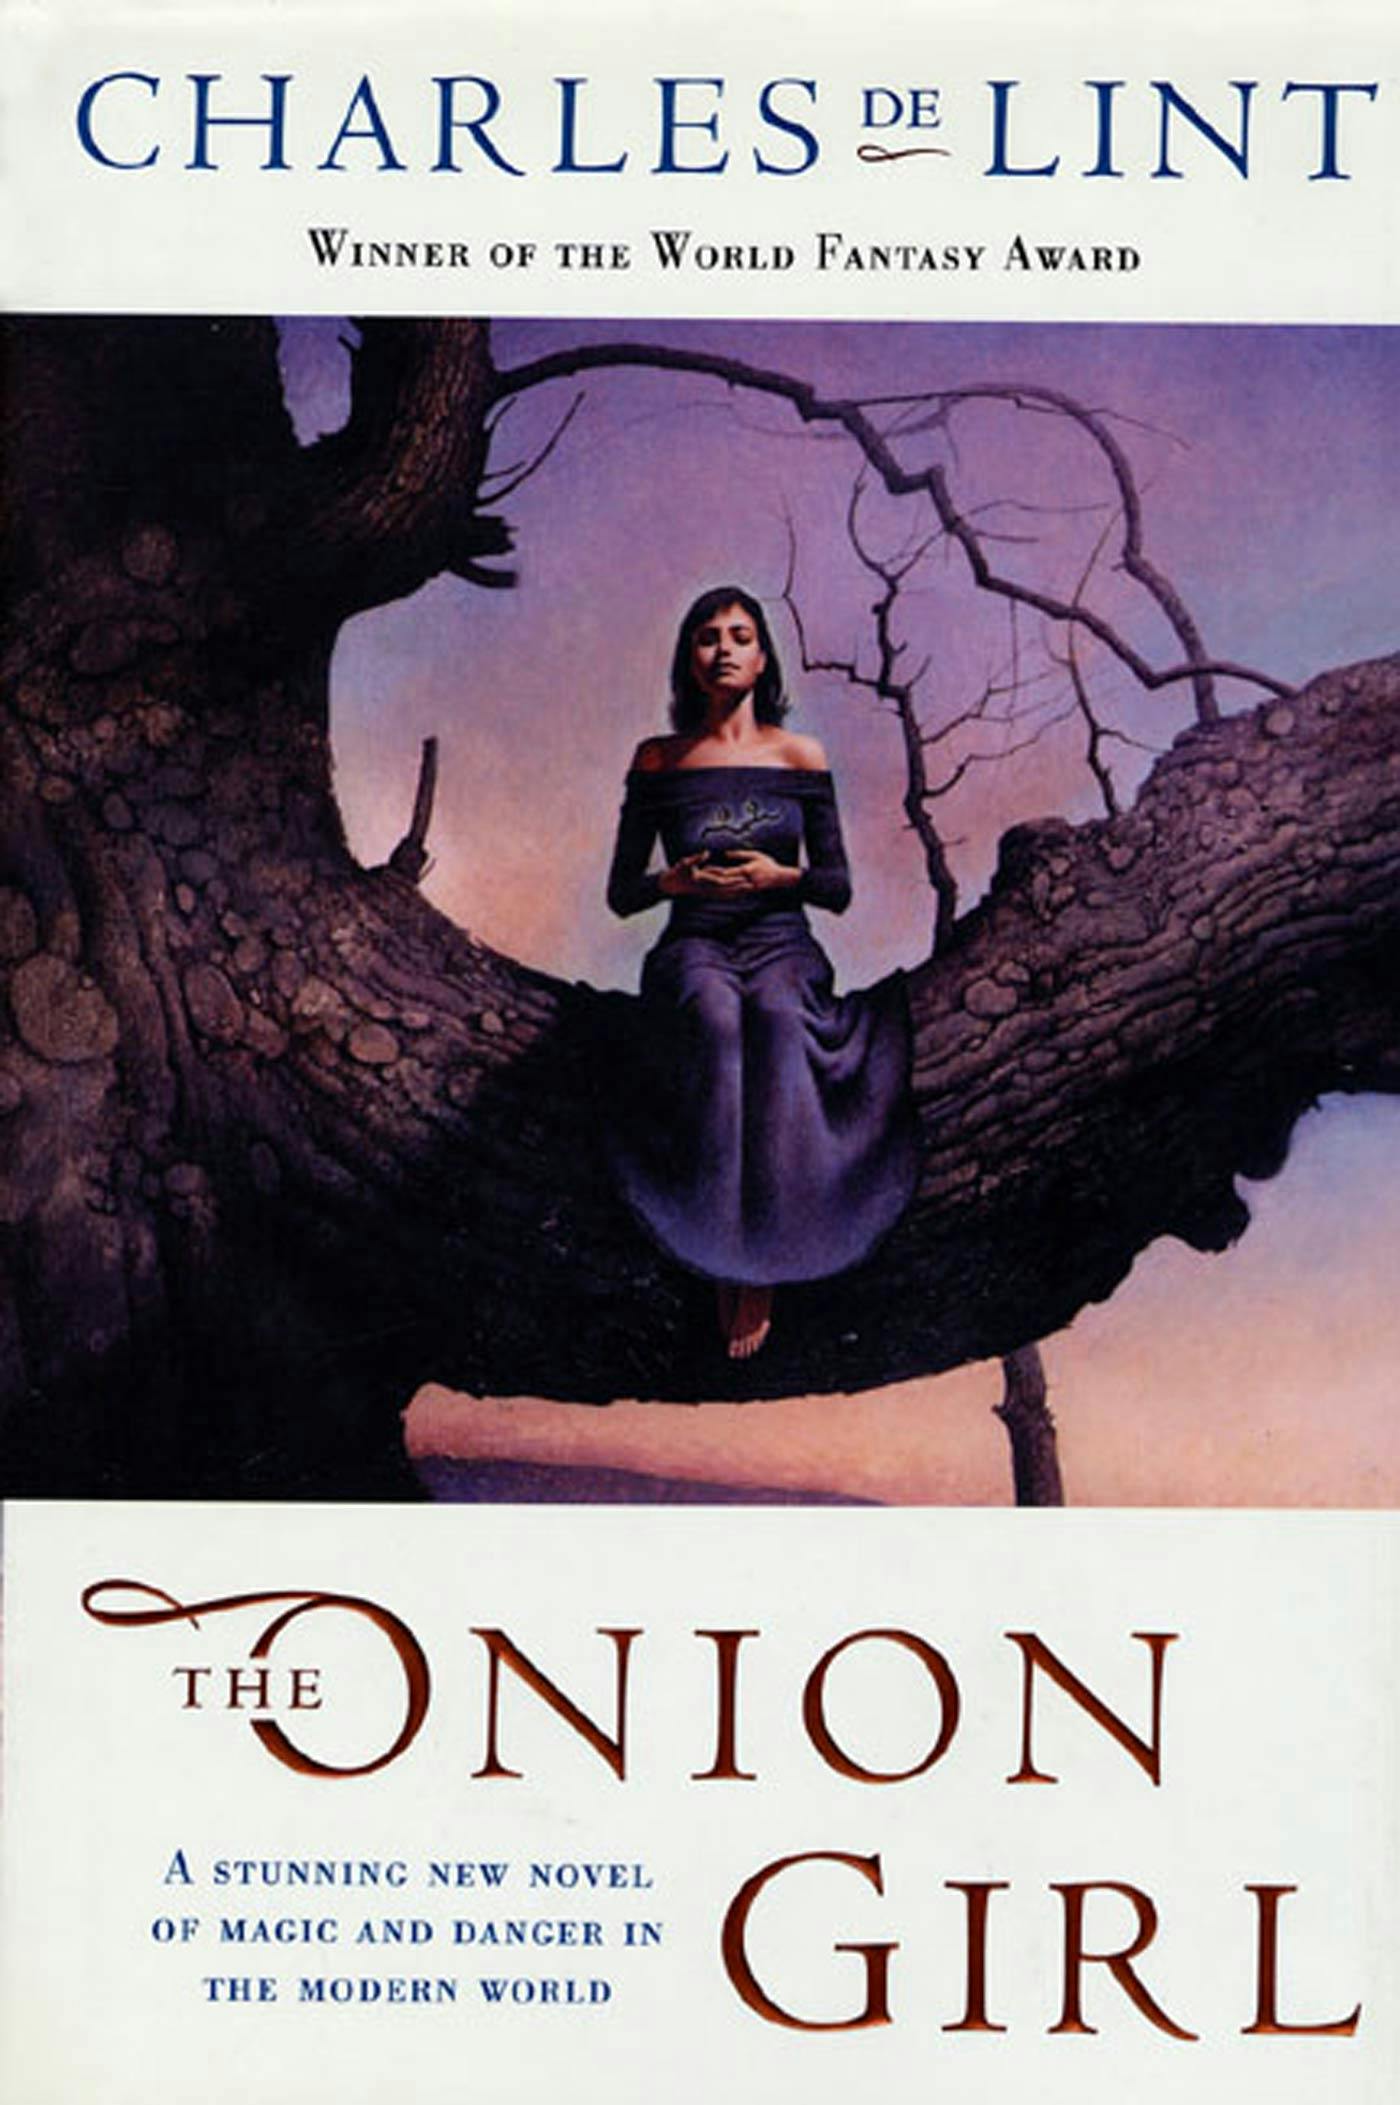 Cover for the book titled as: The Onion Girl